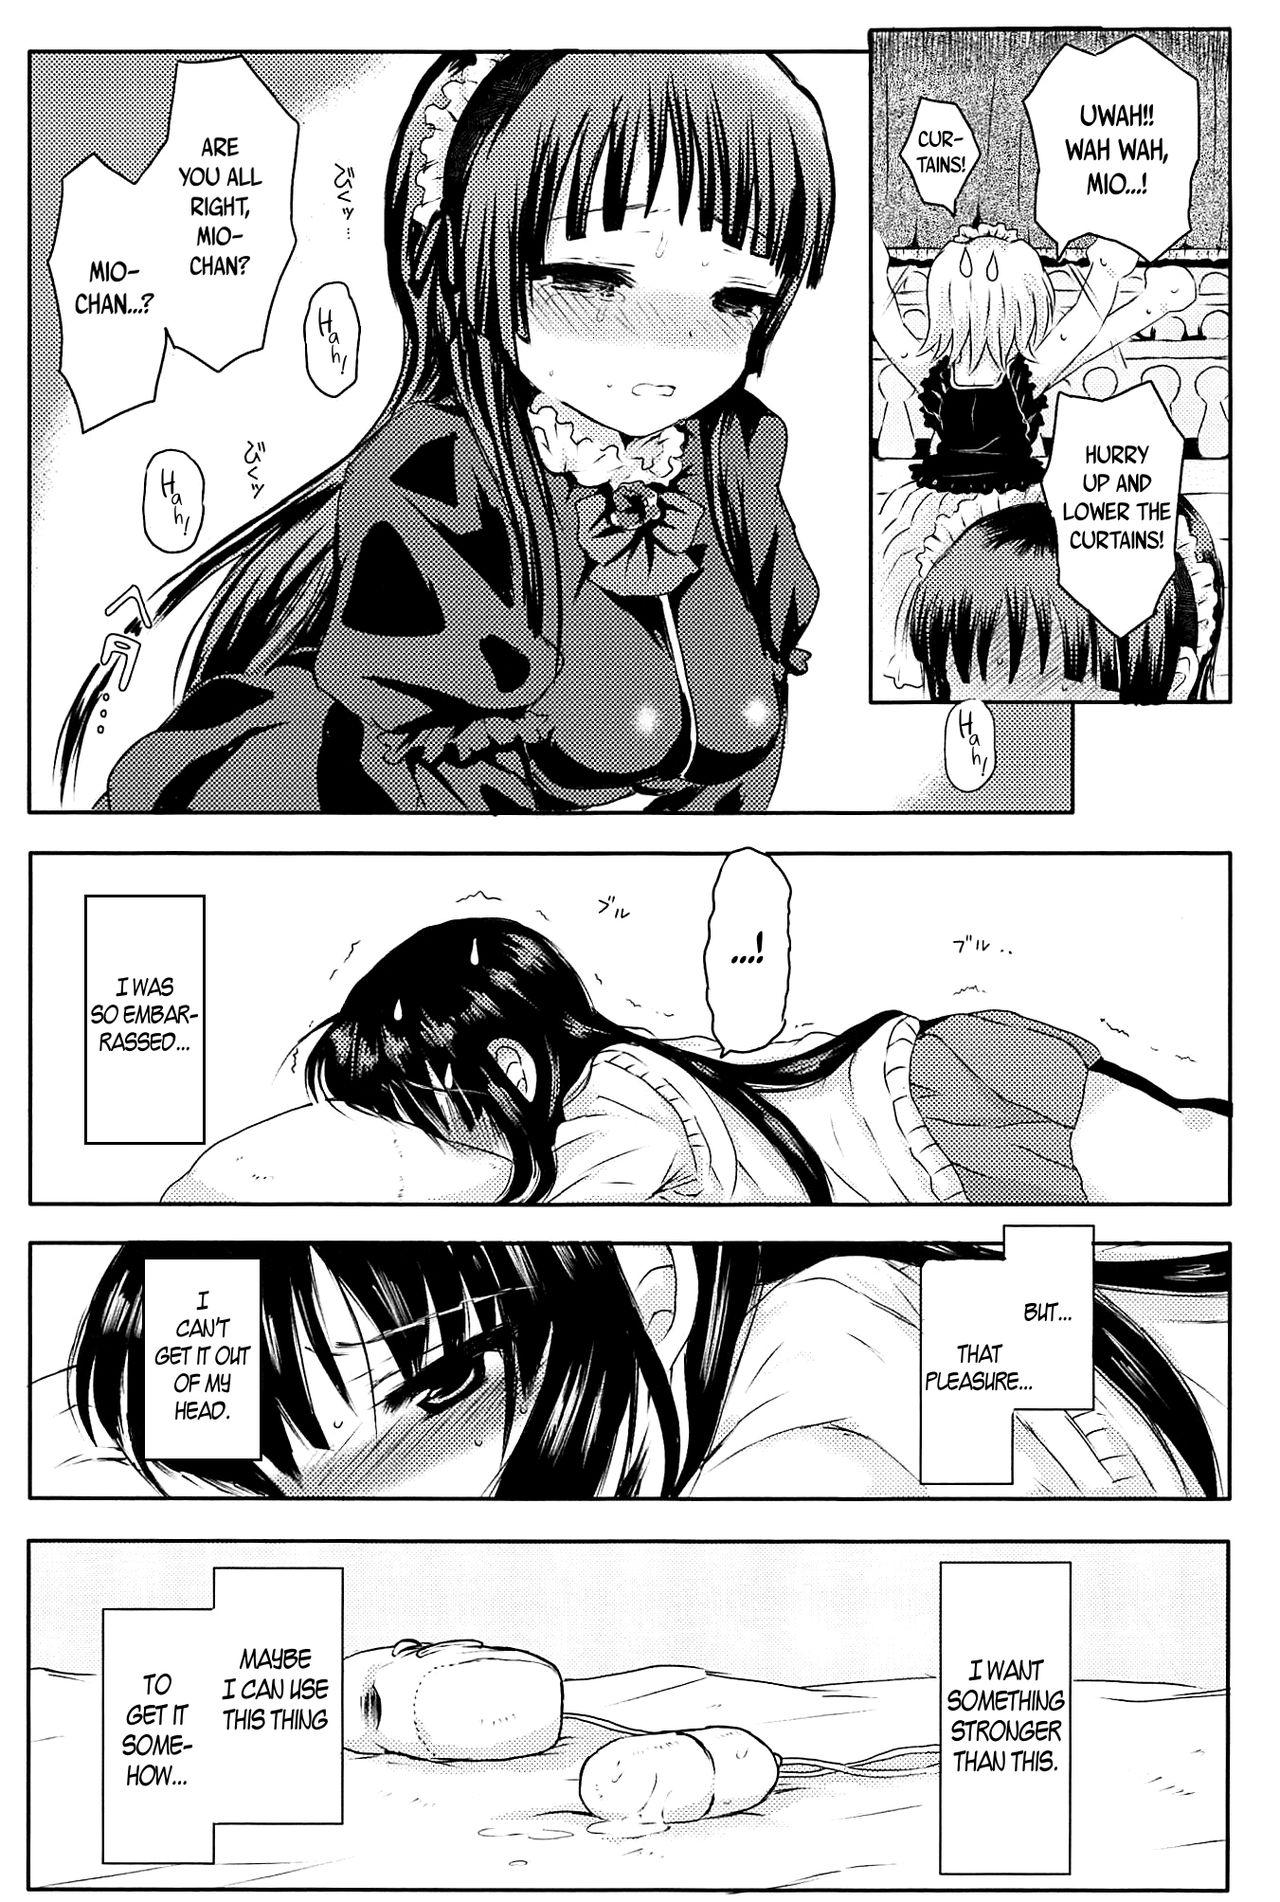 Lesbo Miobon! - K-on Livecams - Page 8